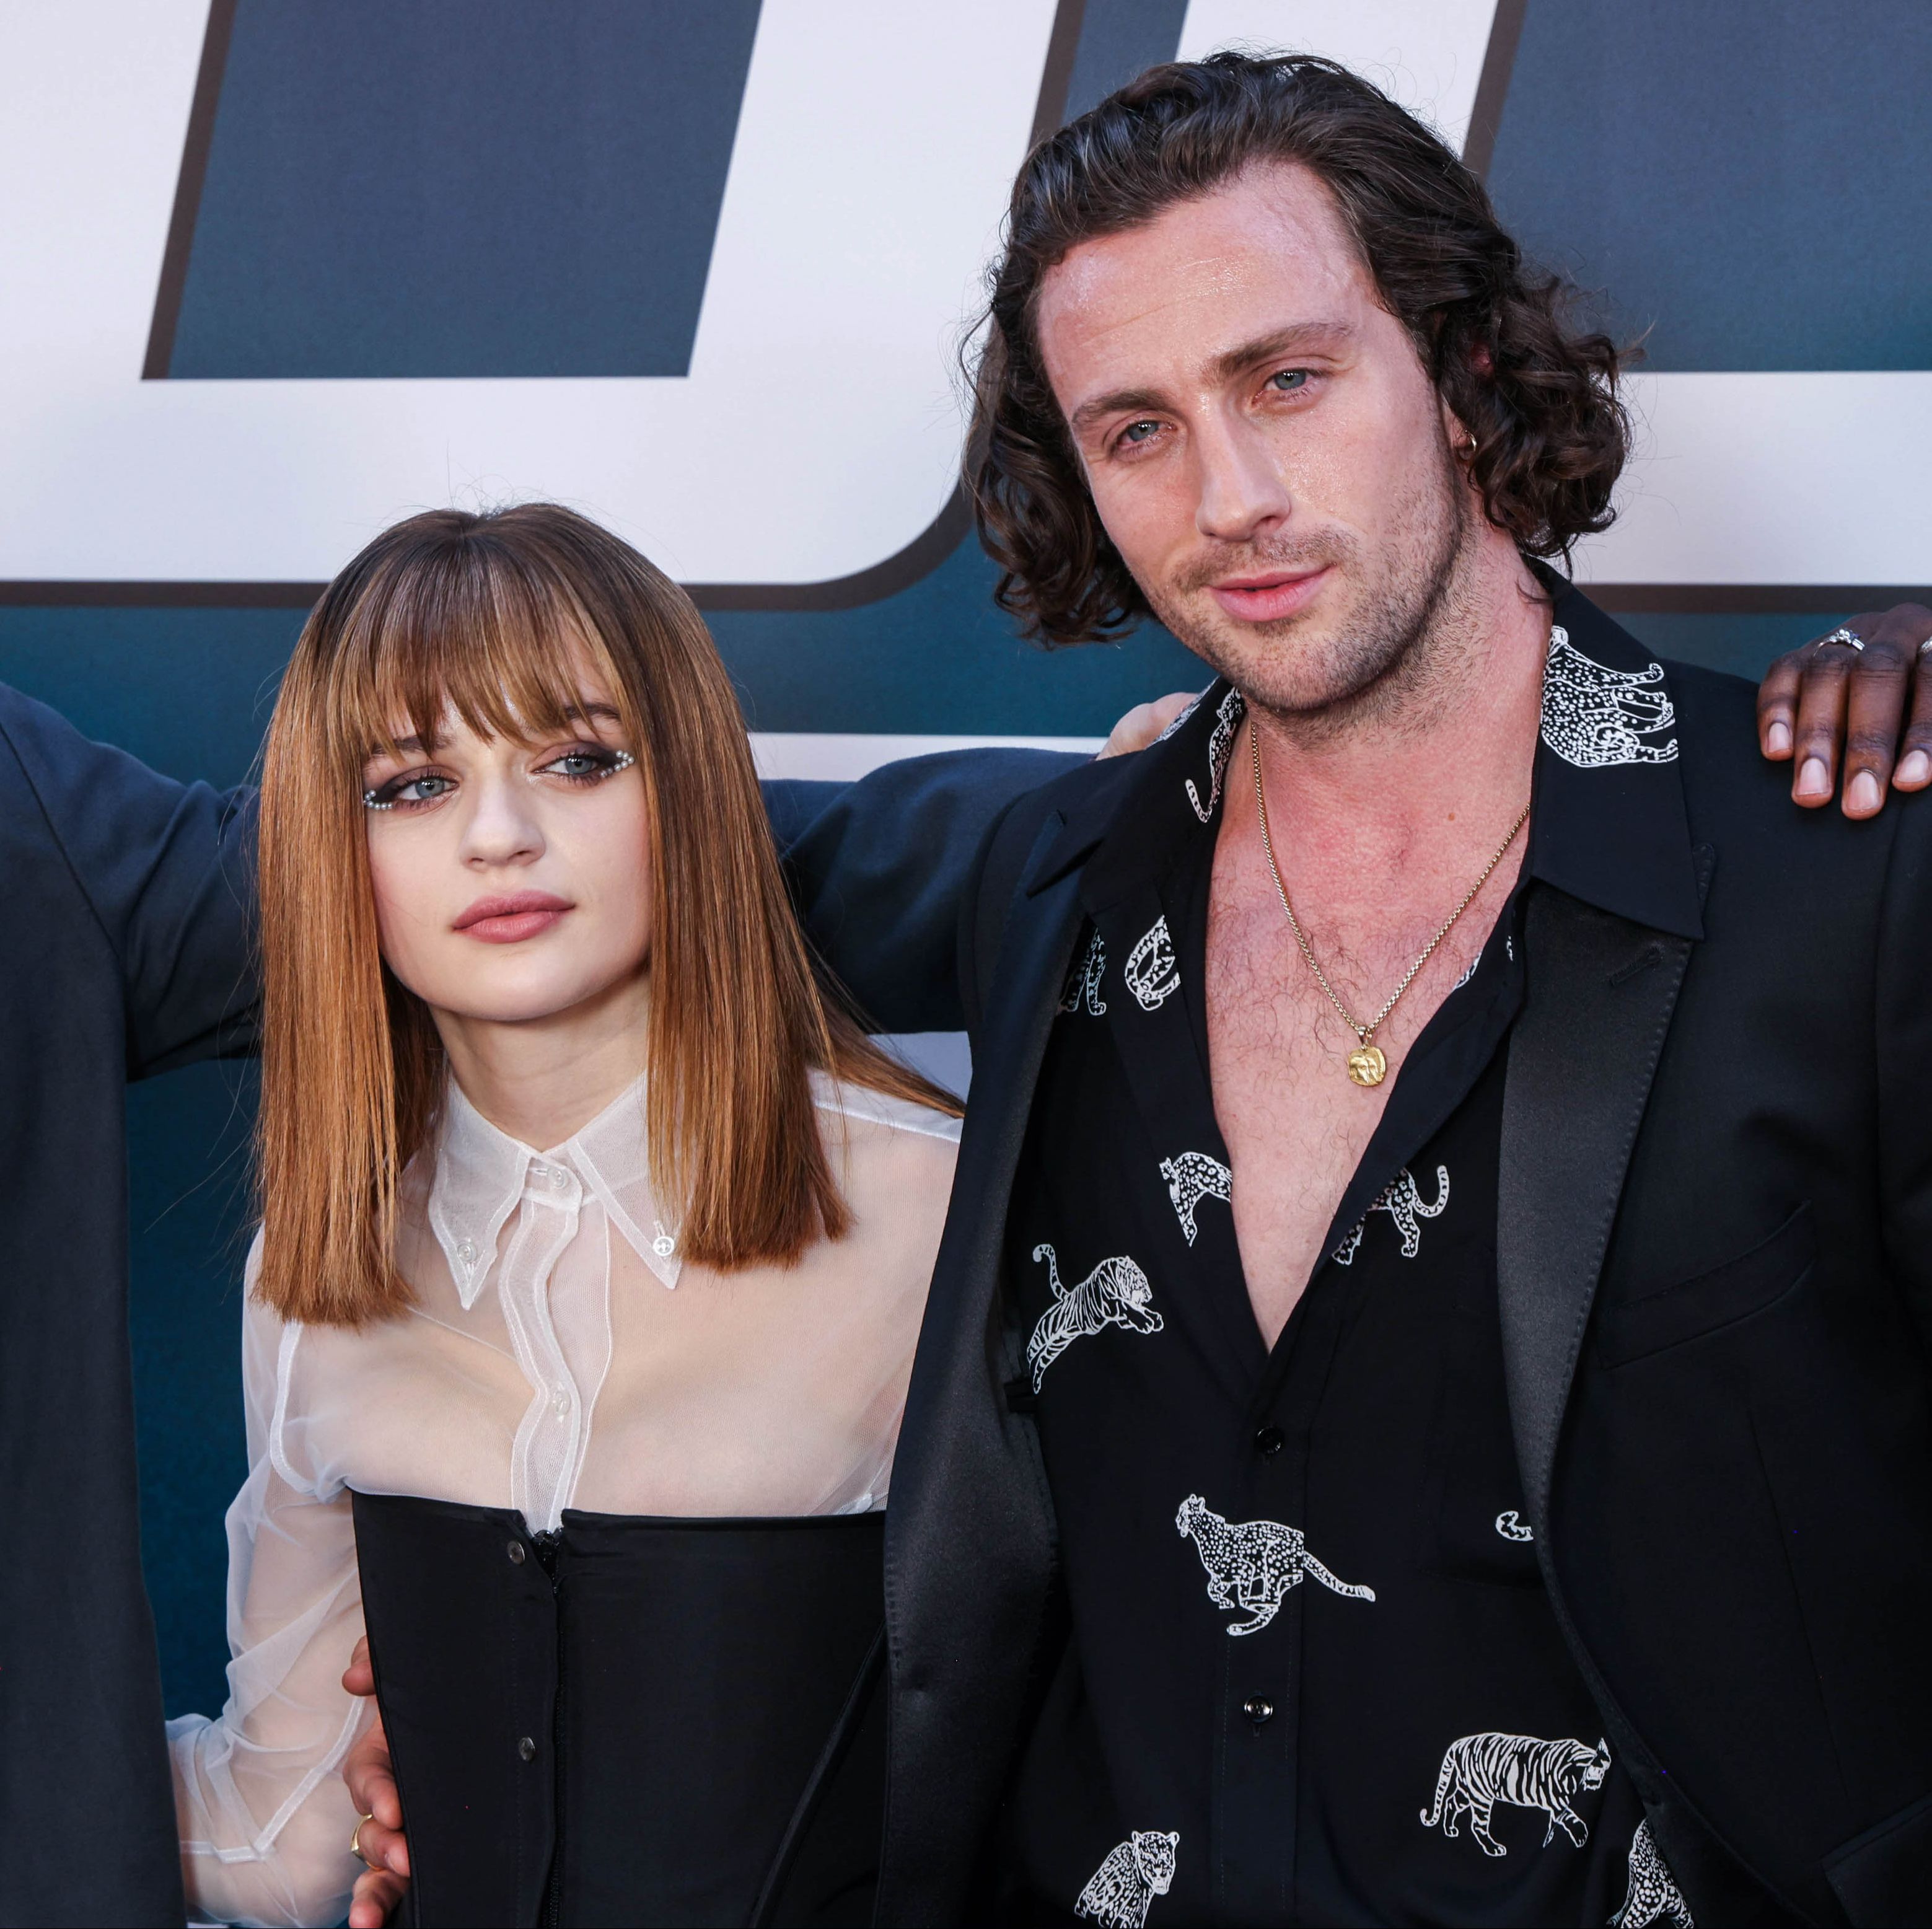 Getting to the Bottom of These Fake Joey King and Aaron Taylor-Johnson Cheating Rumors